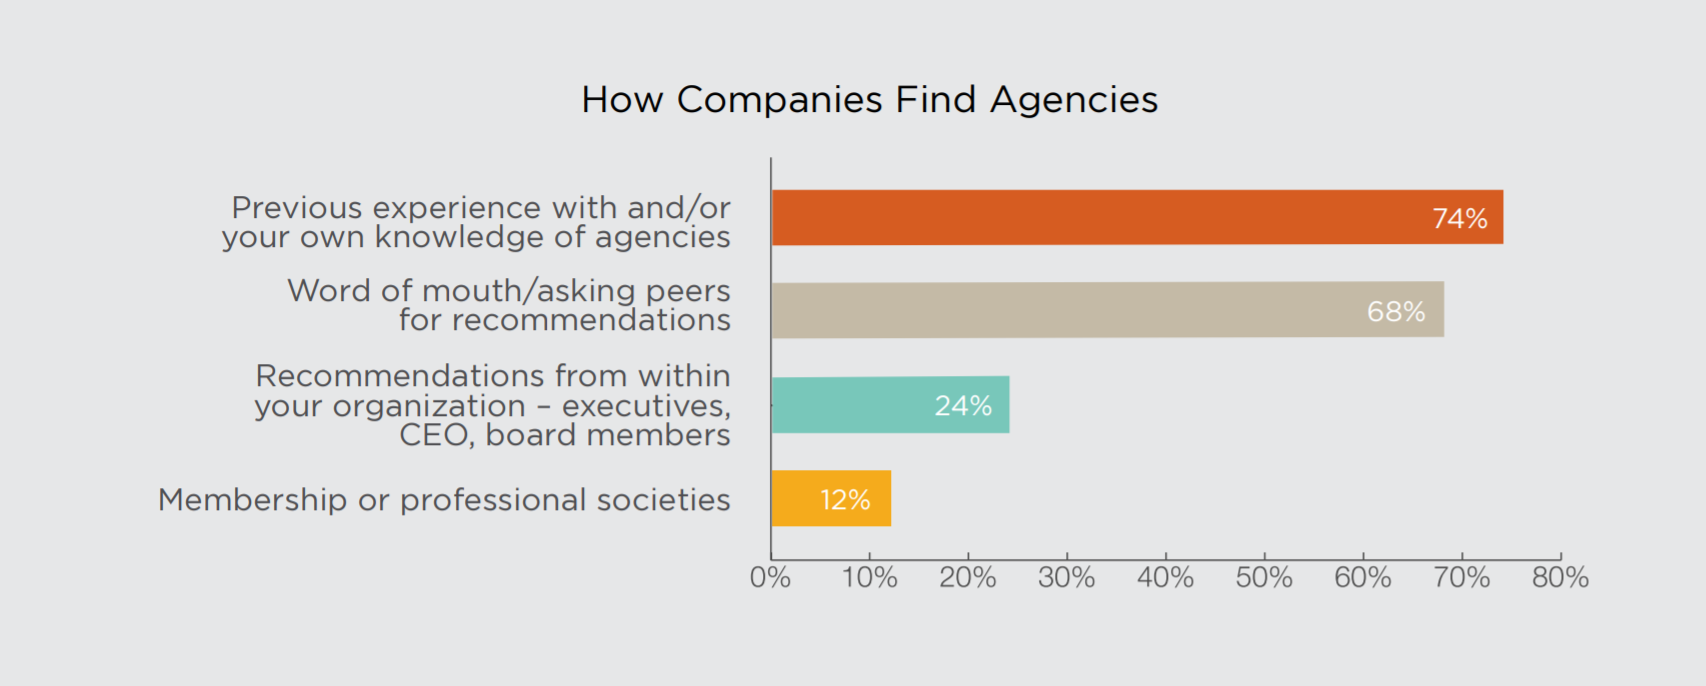 How do companies find agencies?